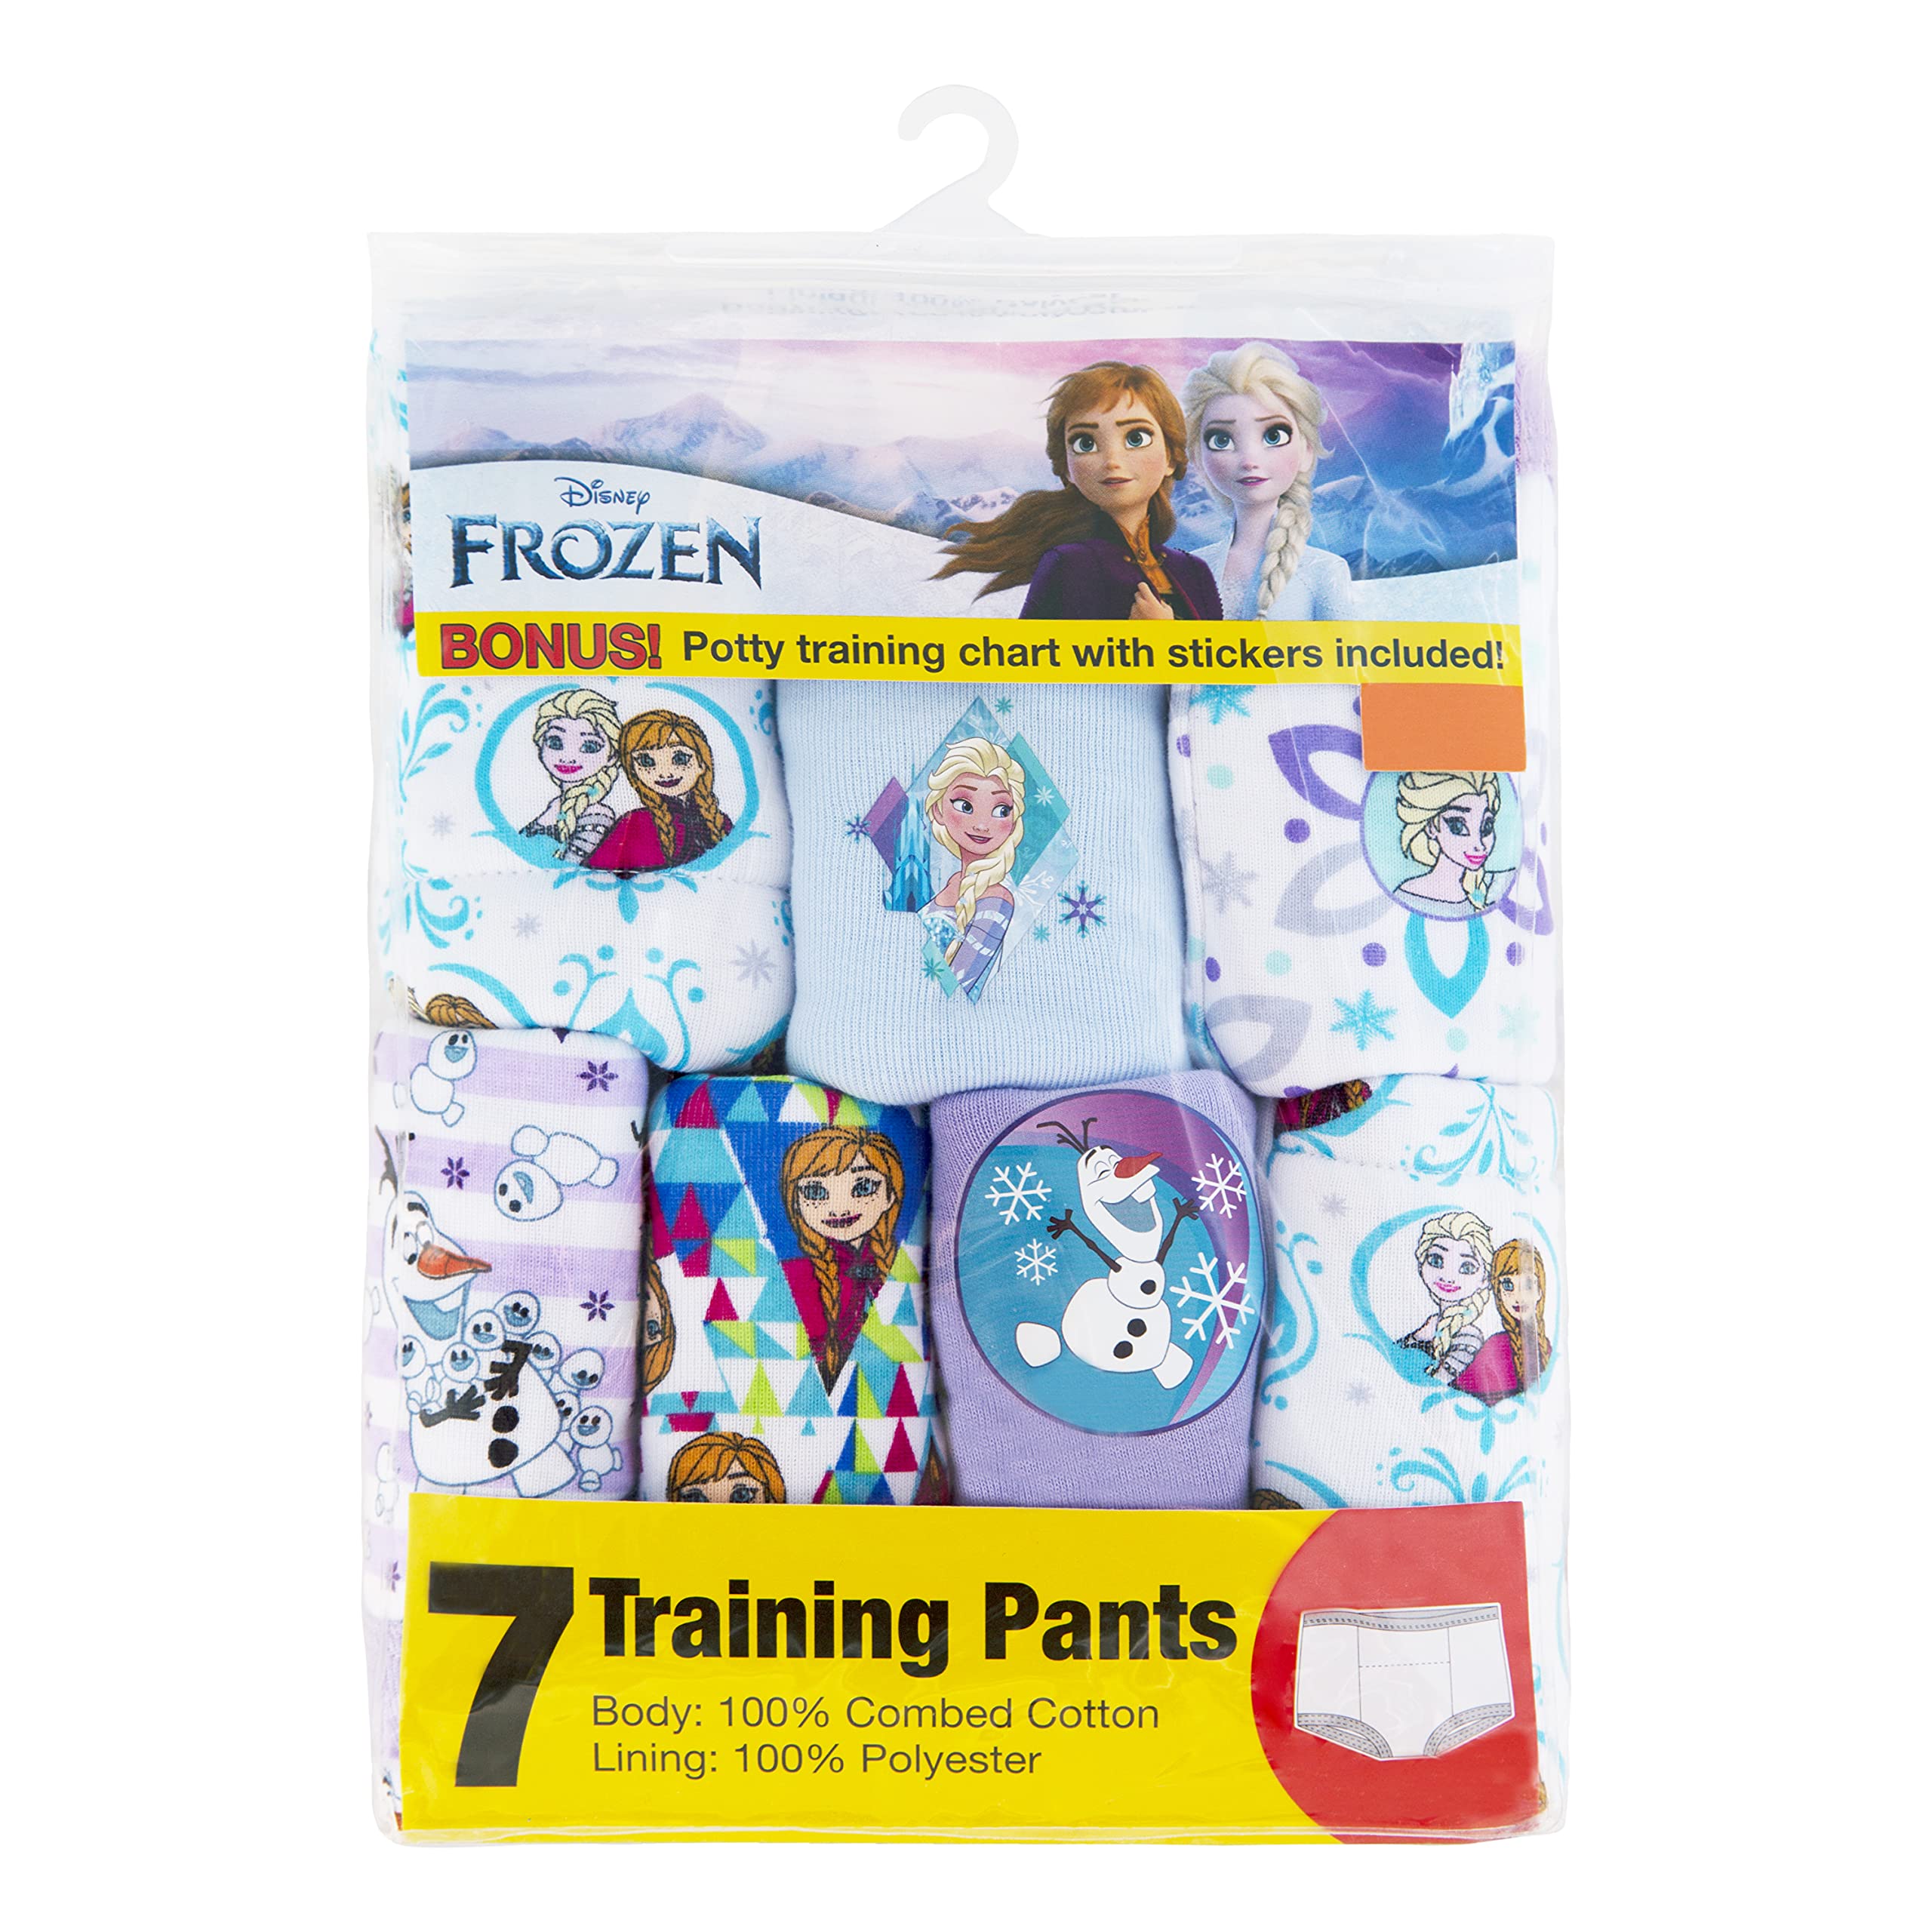 Disney Frozen Toddler Girls 7-pk Potty Training Pants with Success Tracking Chart and Stickers Sizes 2t, 3t, 4t